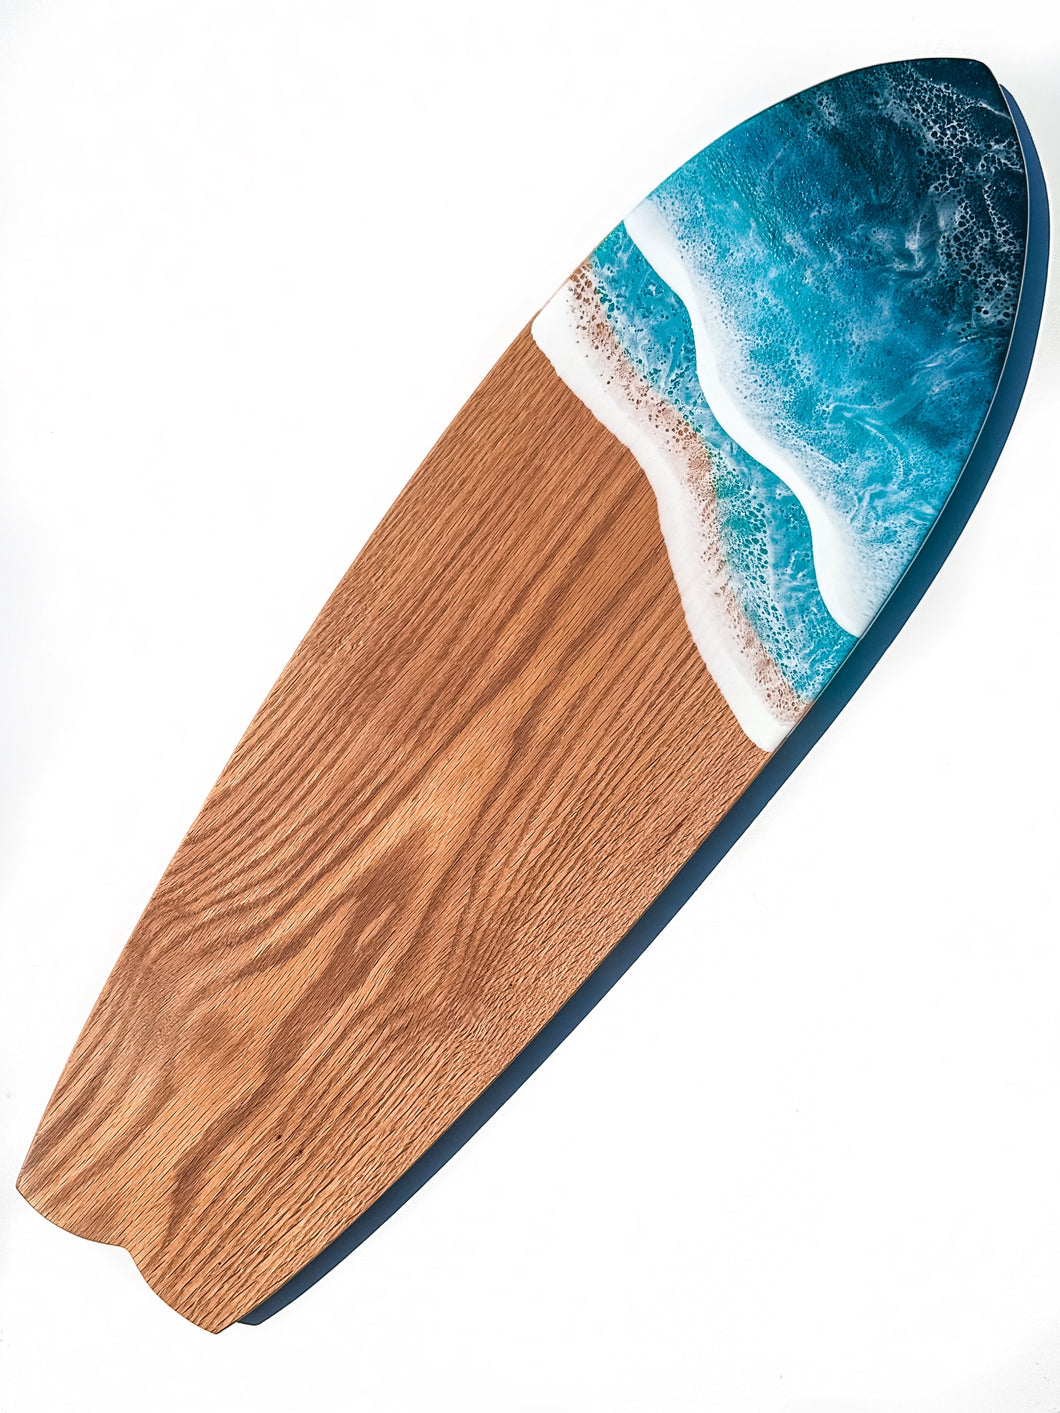 Made-to-Order Extra Large Surfboard Ocean Charcuterie Board